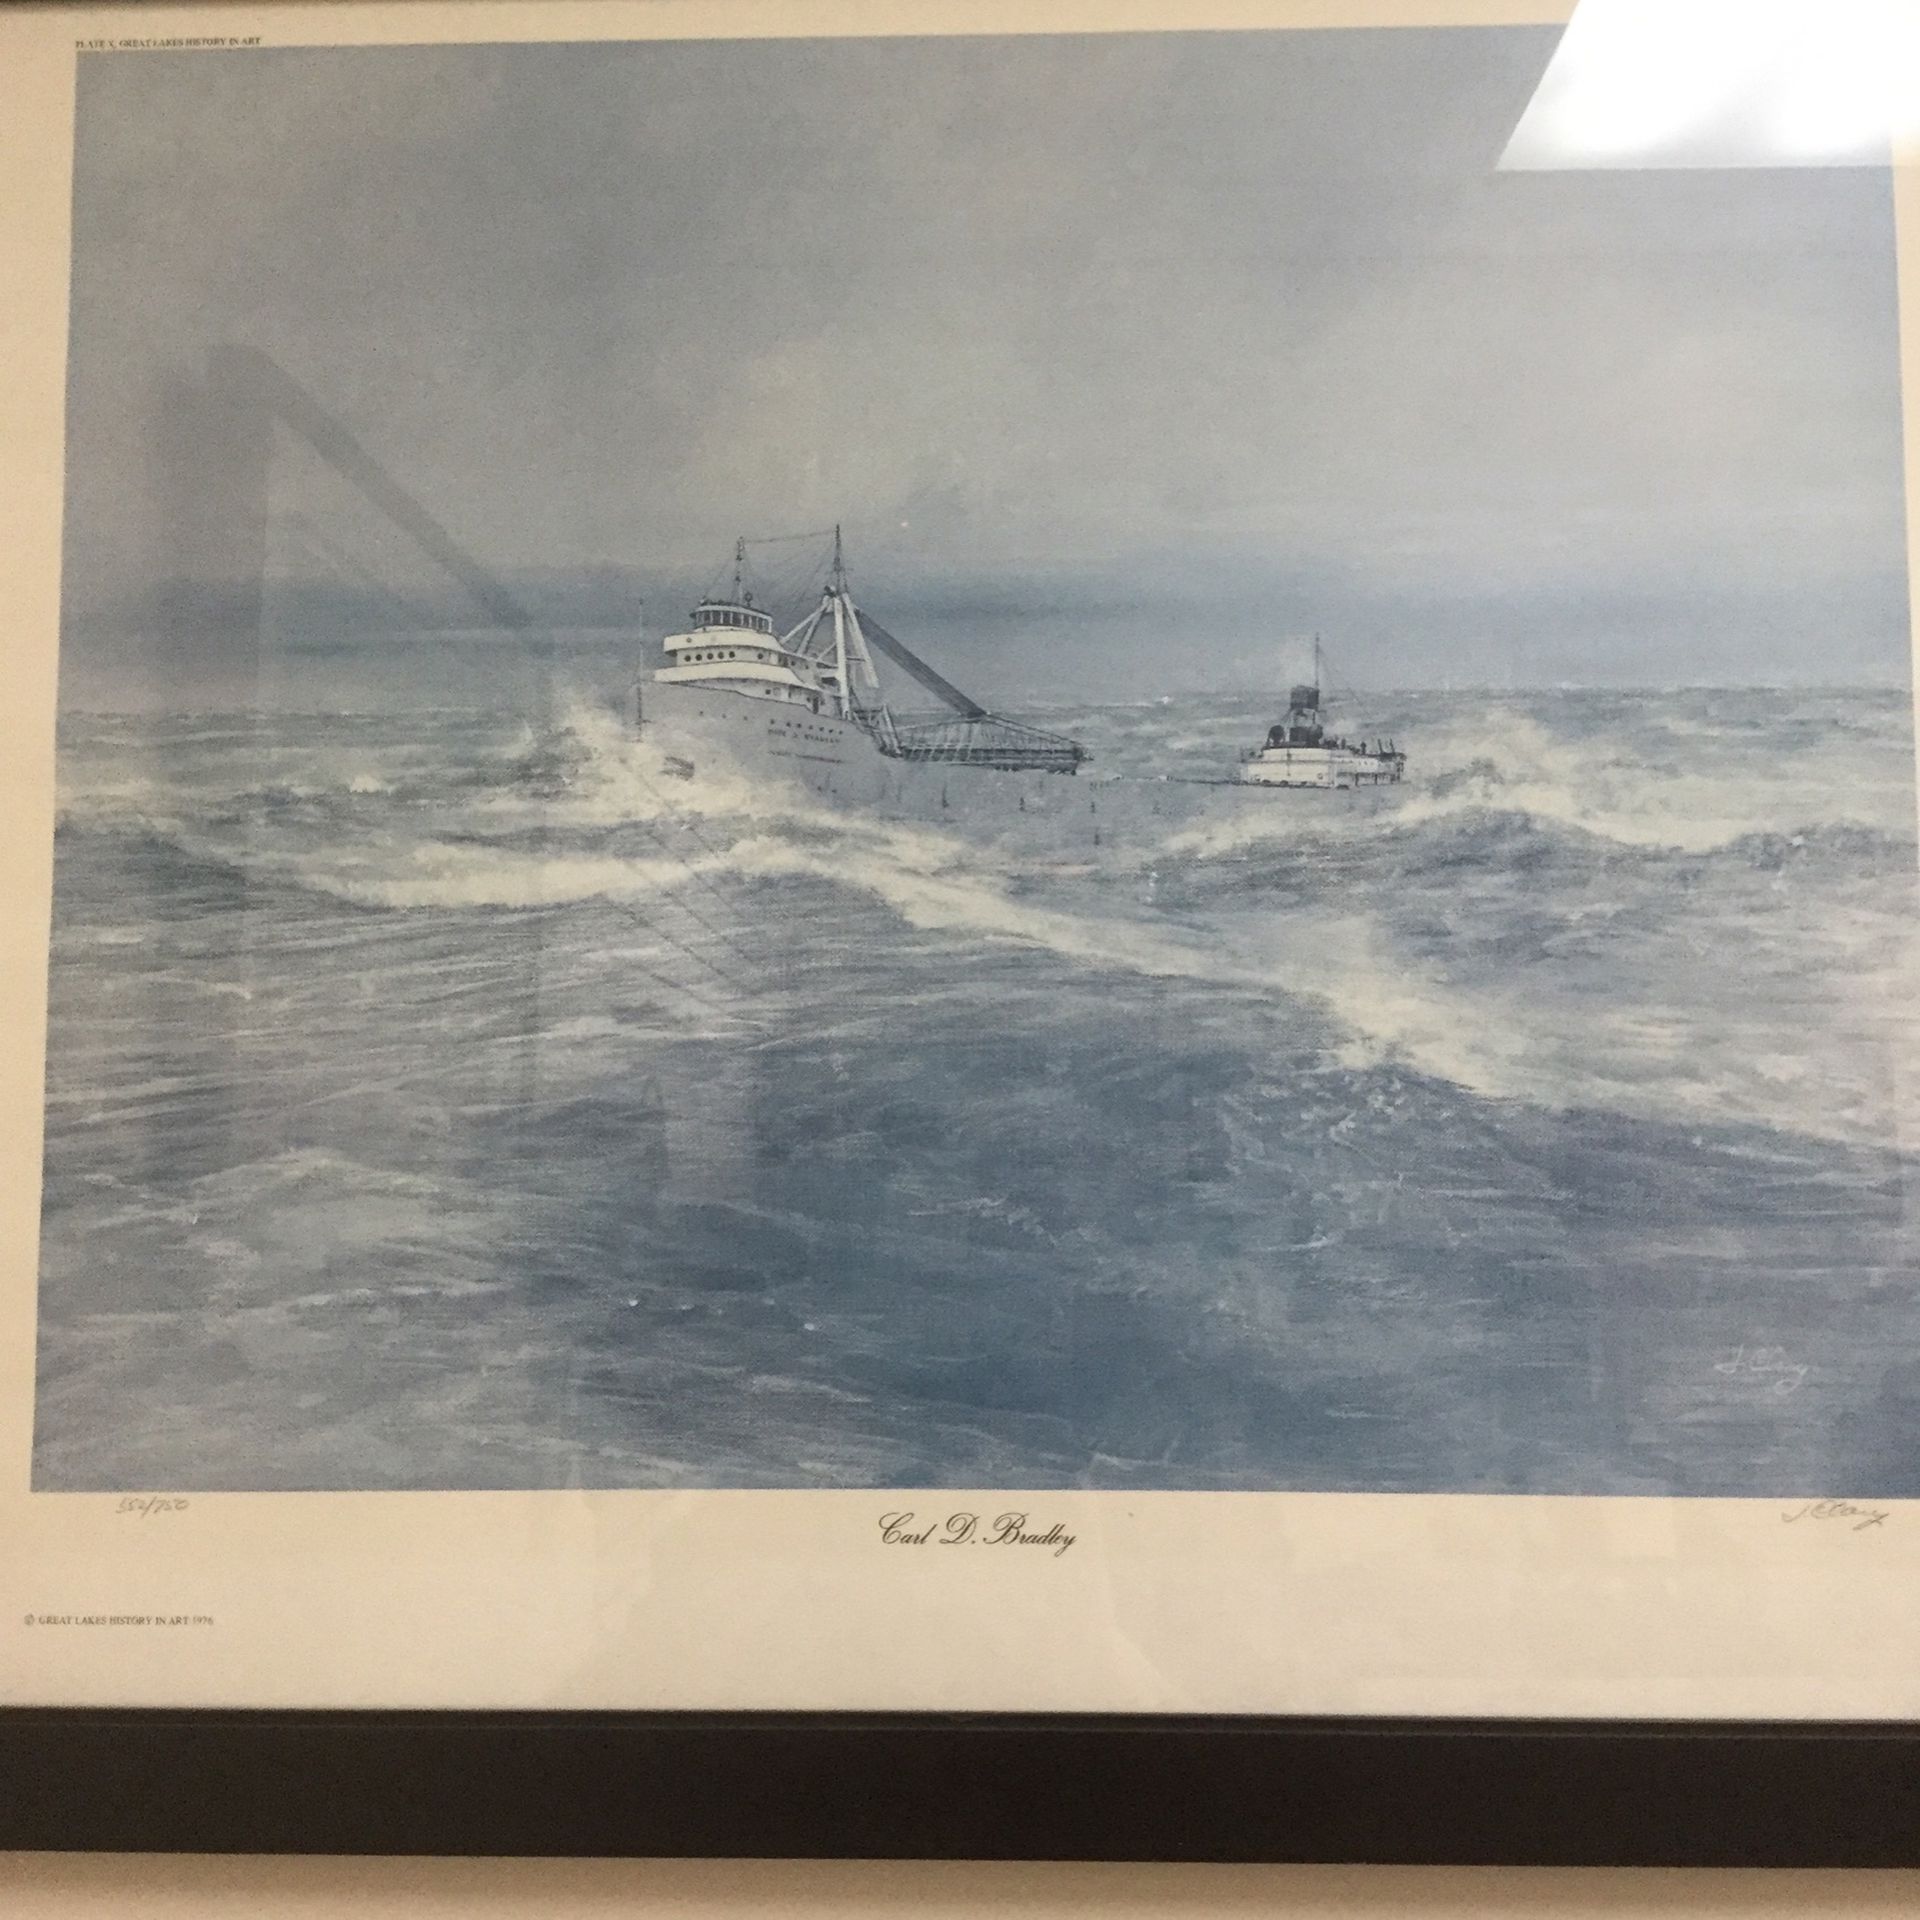 Vintage Print by John Cleary 552/750 Carl D Bradley From the Great Lakes History Art of 1976